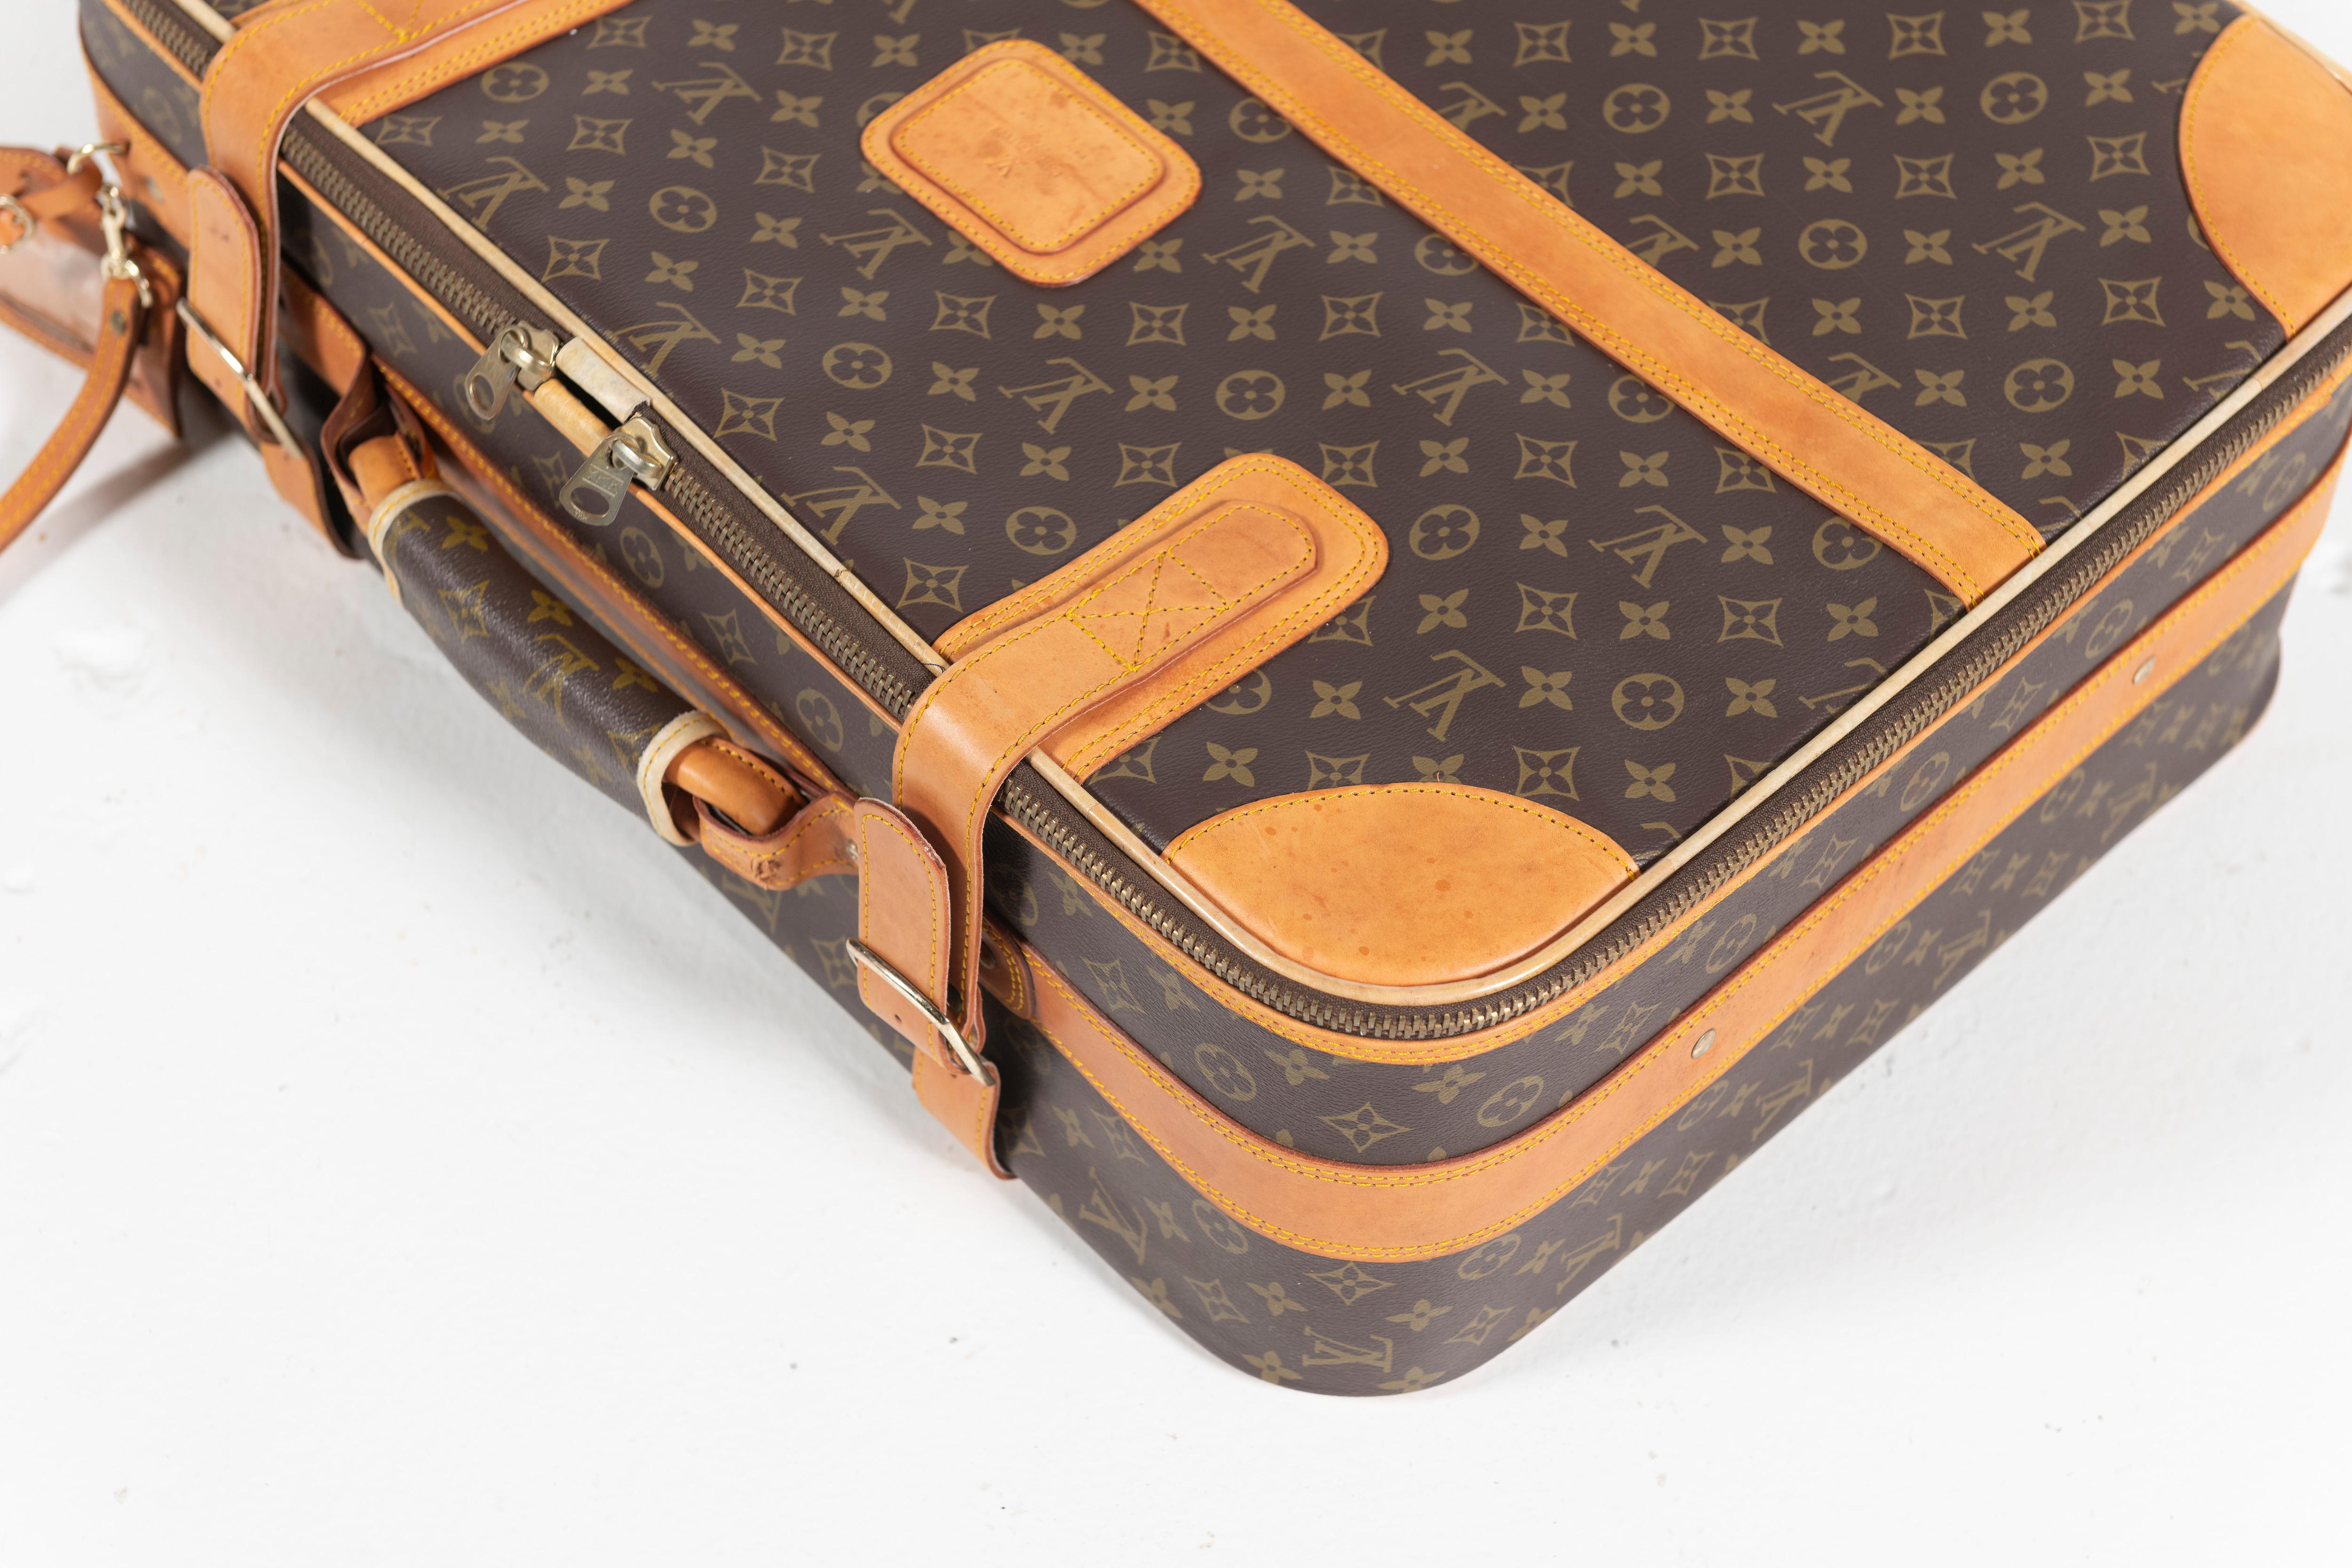 Vintage Louis Vuitton Suitcase, Monogrammed Coated Canvas, Small-Sized For Sale 5